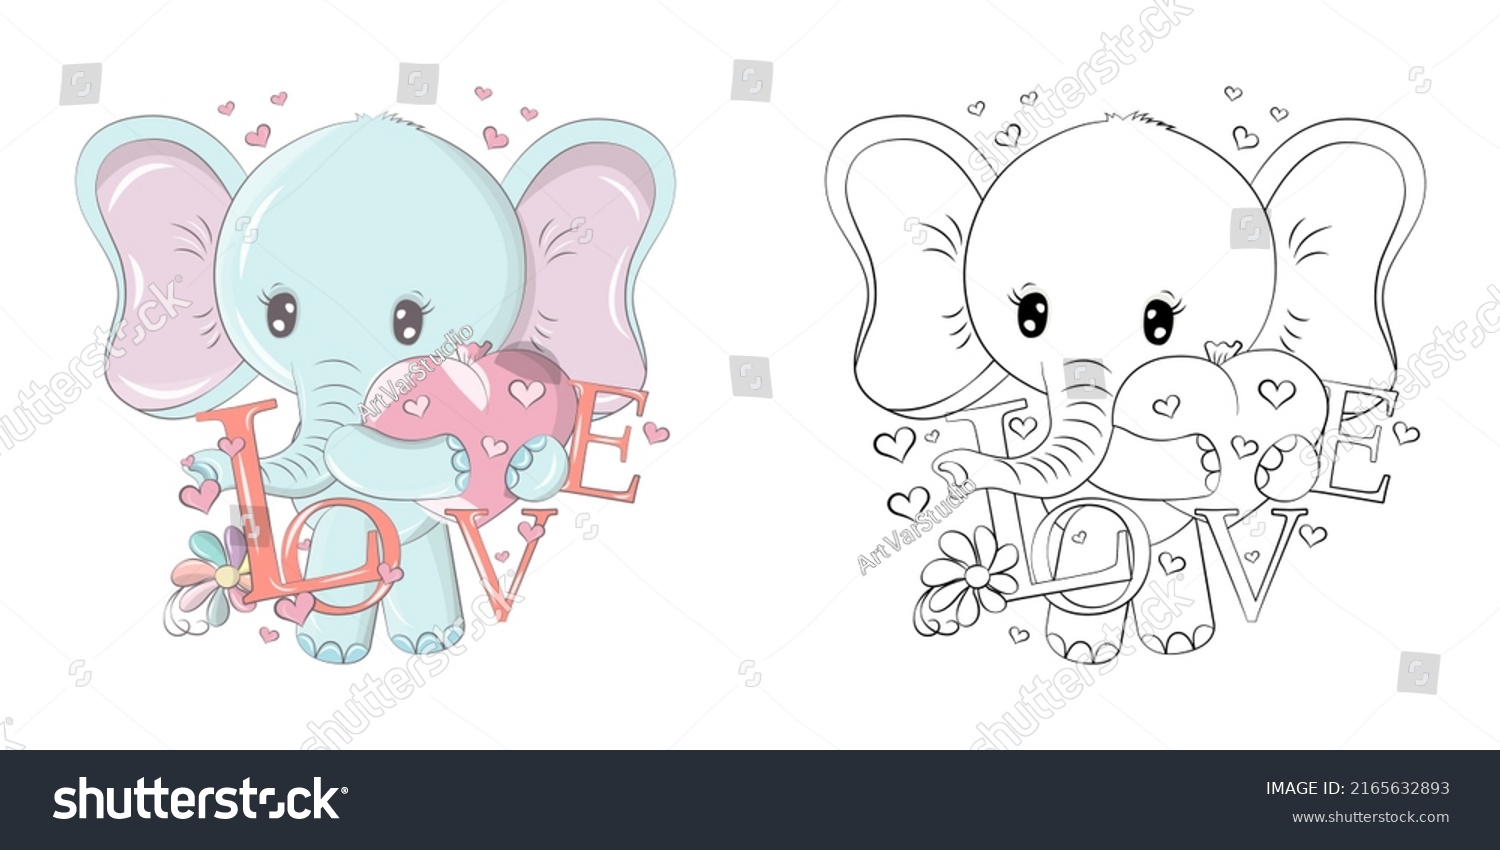 SVG of Elephant Clipart Multicolored and Black and White. Beautiful Clip Art Elephant with Balloon. Vector Illustration of an Animal for Prints for Clothes, Stickers, Baby Shower, Coloring Pages svg